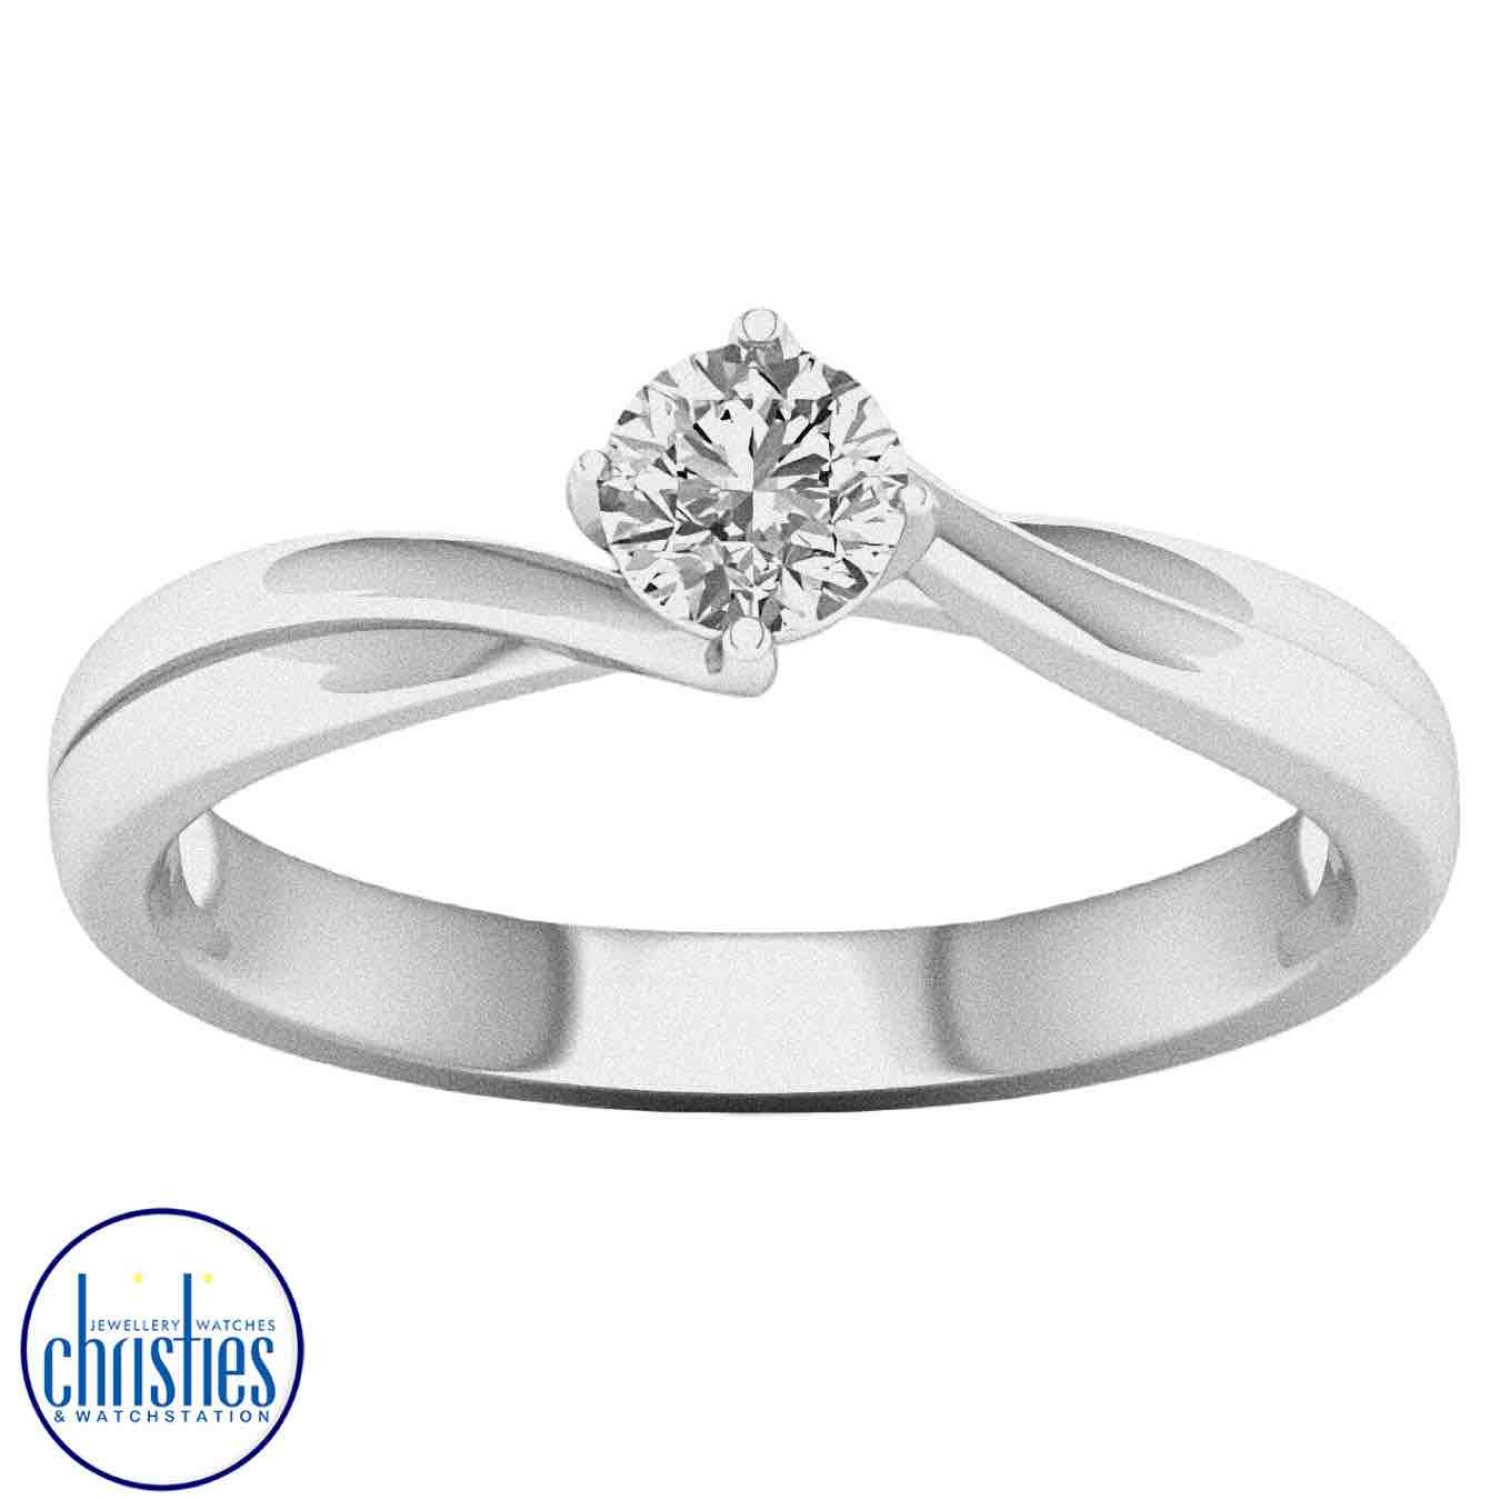 9ct White  Gold Diamond Solitaire 0.33ct Ring MSD0391EG. A 9ct white gold  diamond ring with a total of 0.33ct of diamonds  Afterpay - Split your purchase into 4 instalments - Pay for your purchase over 4 instalments, due every two weeks. You’ll pay your 